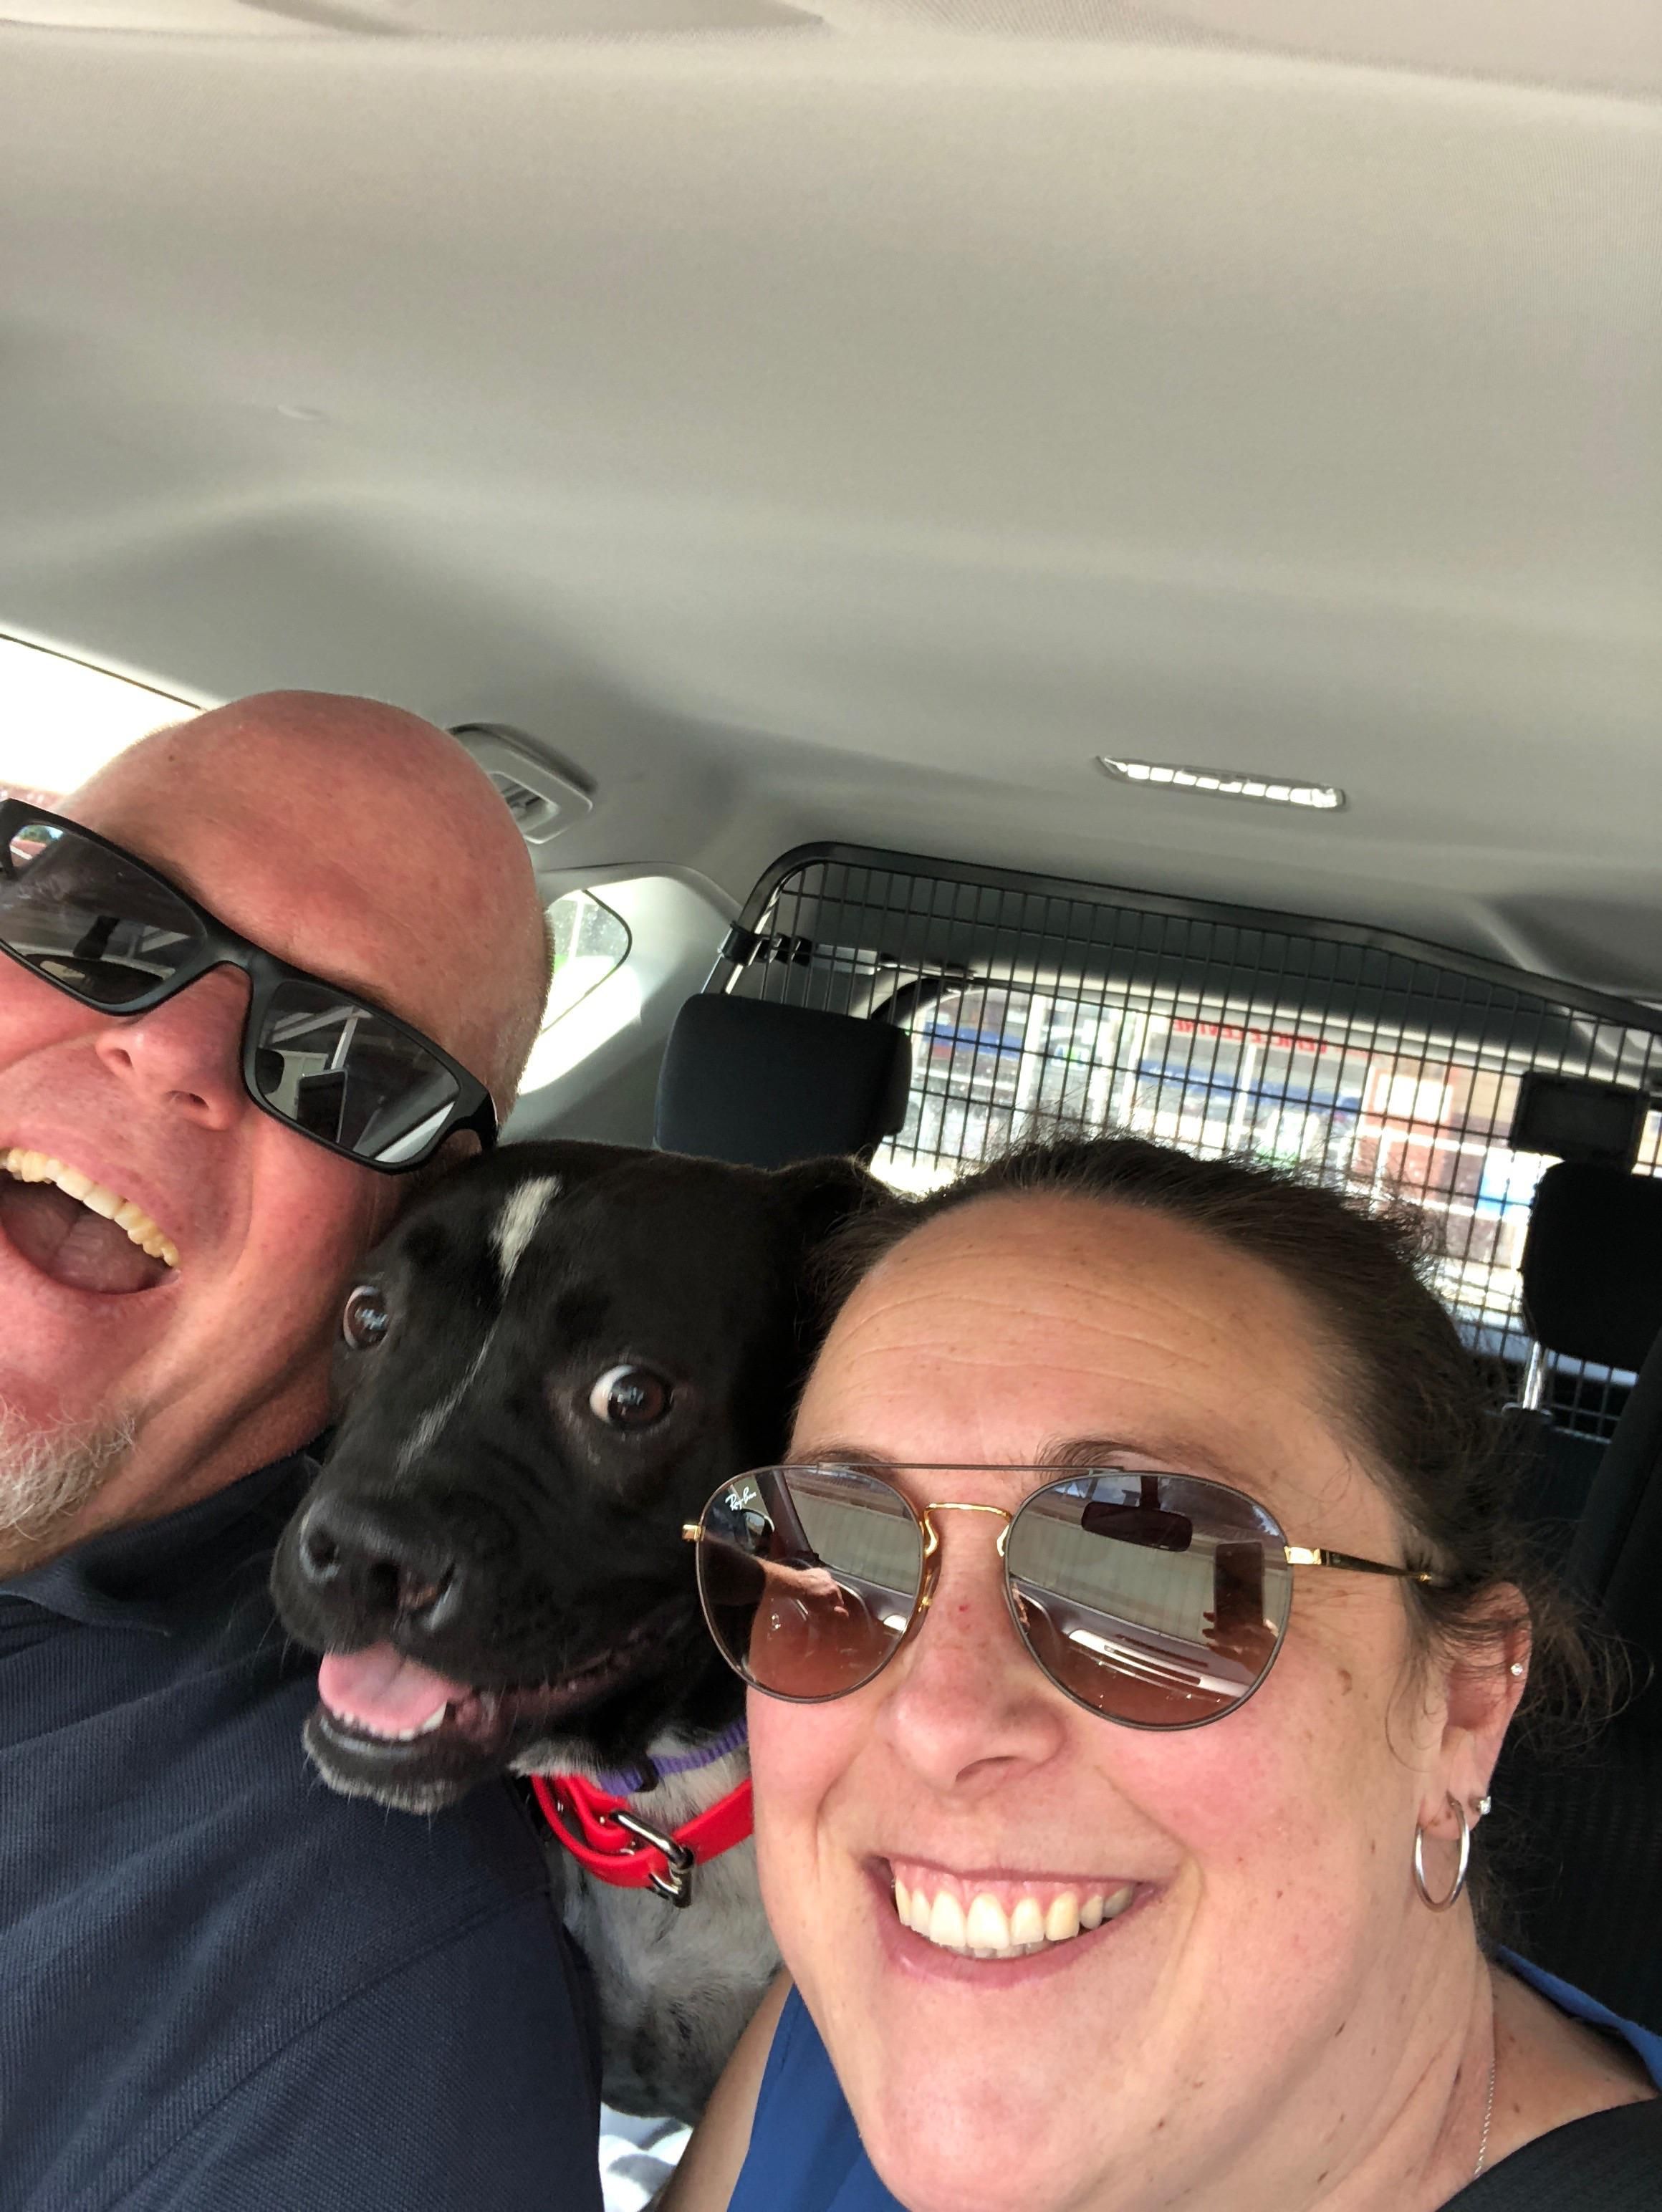 Leaving the shelter with our new family member. Super happy family selfie.